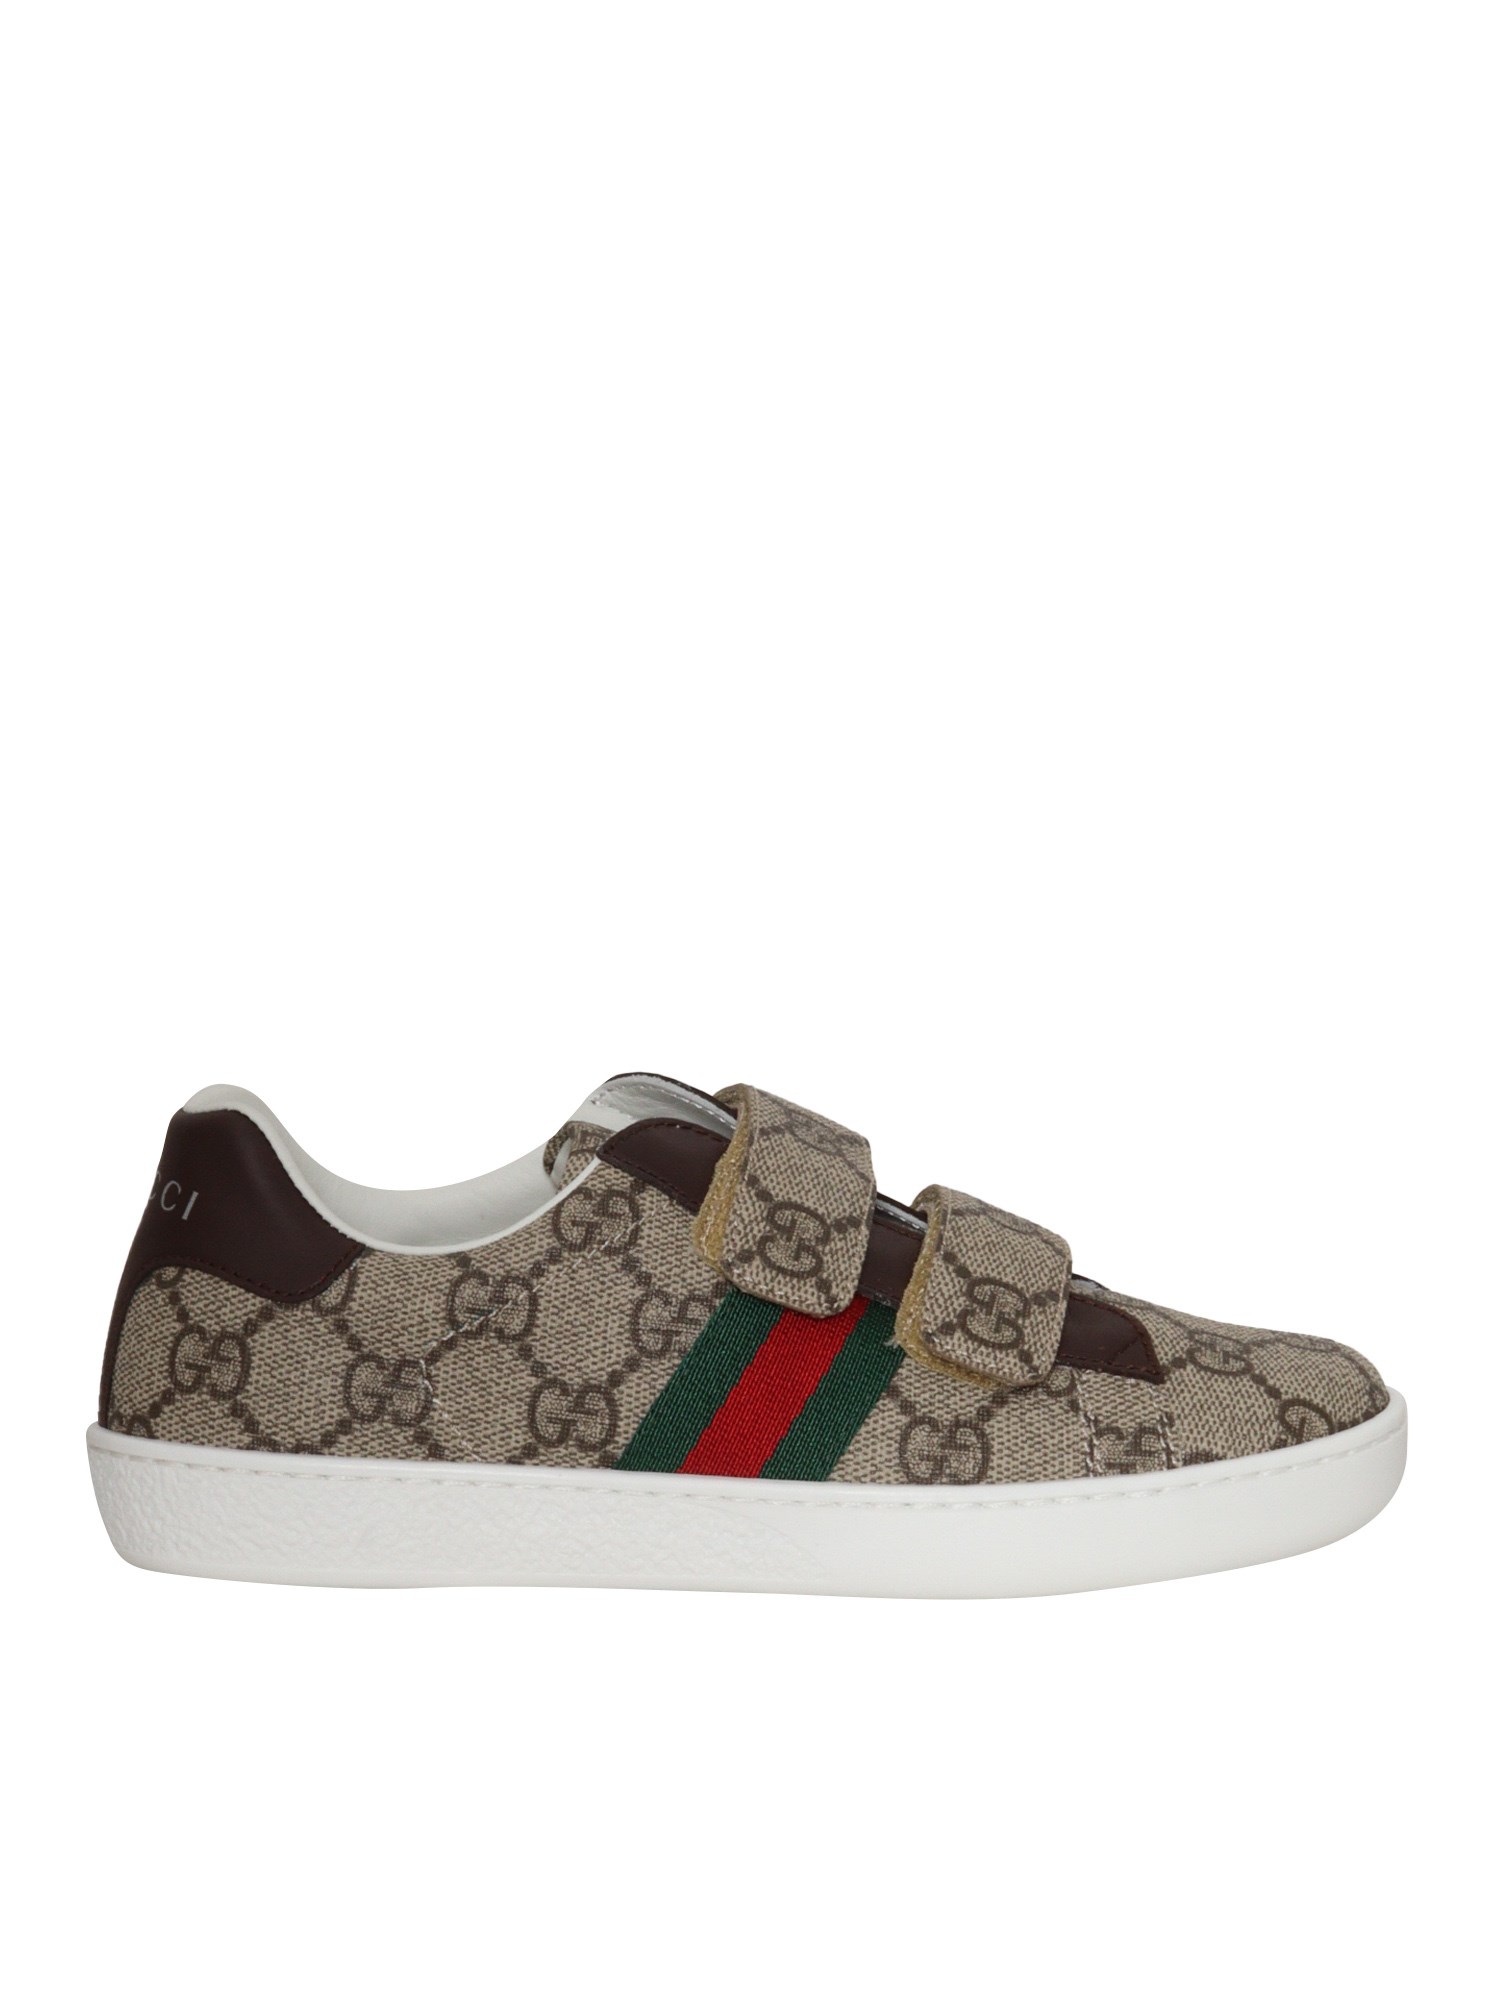 Gucci Gg Trainers With Tears In Multi